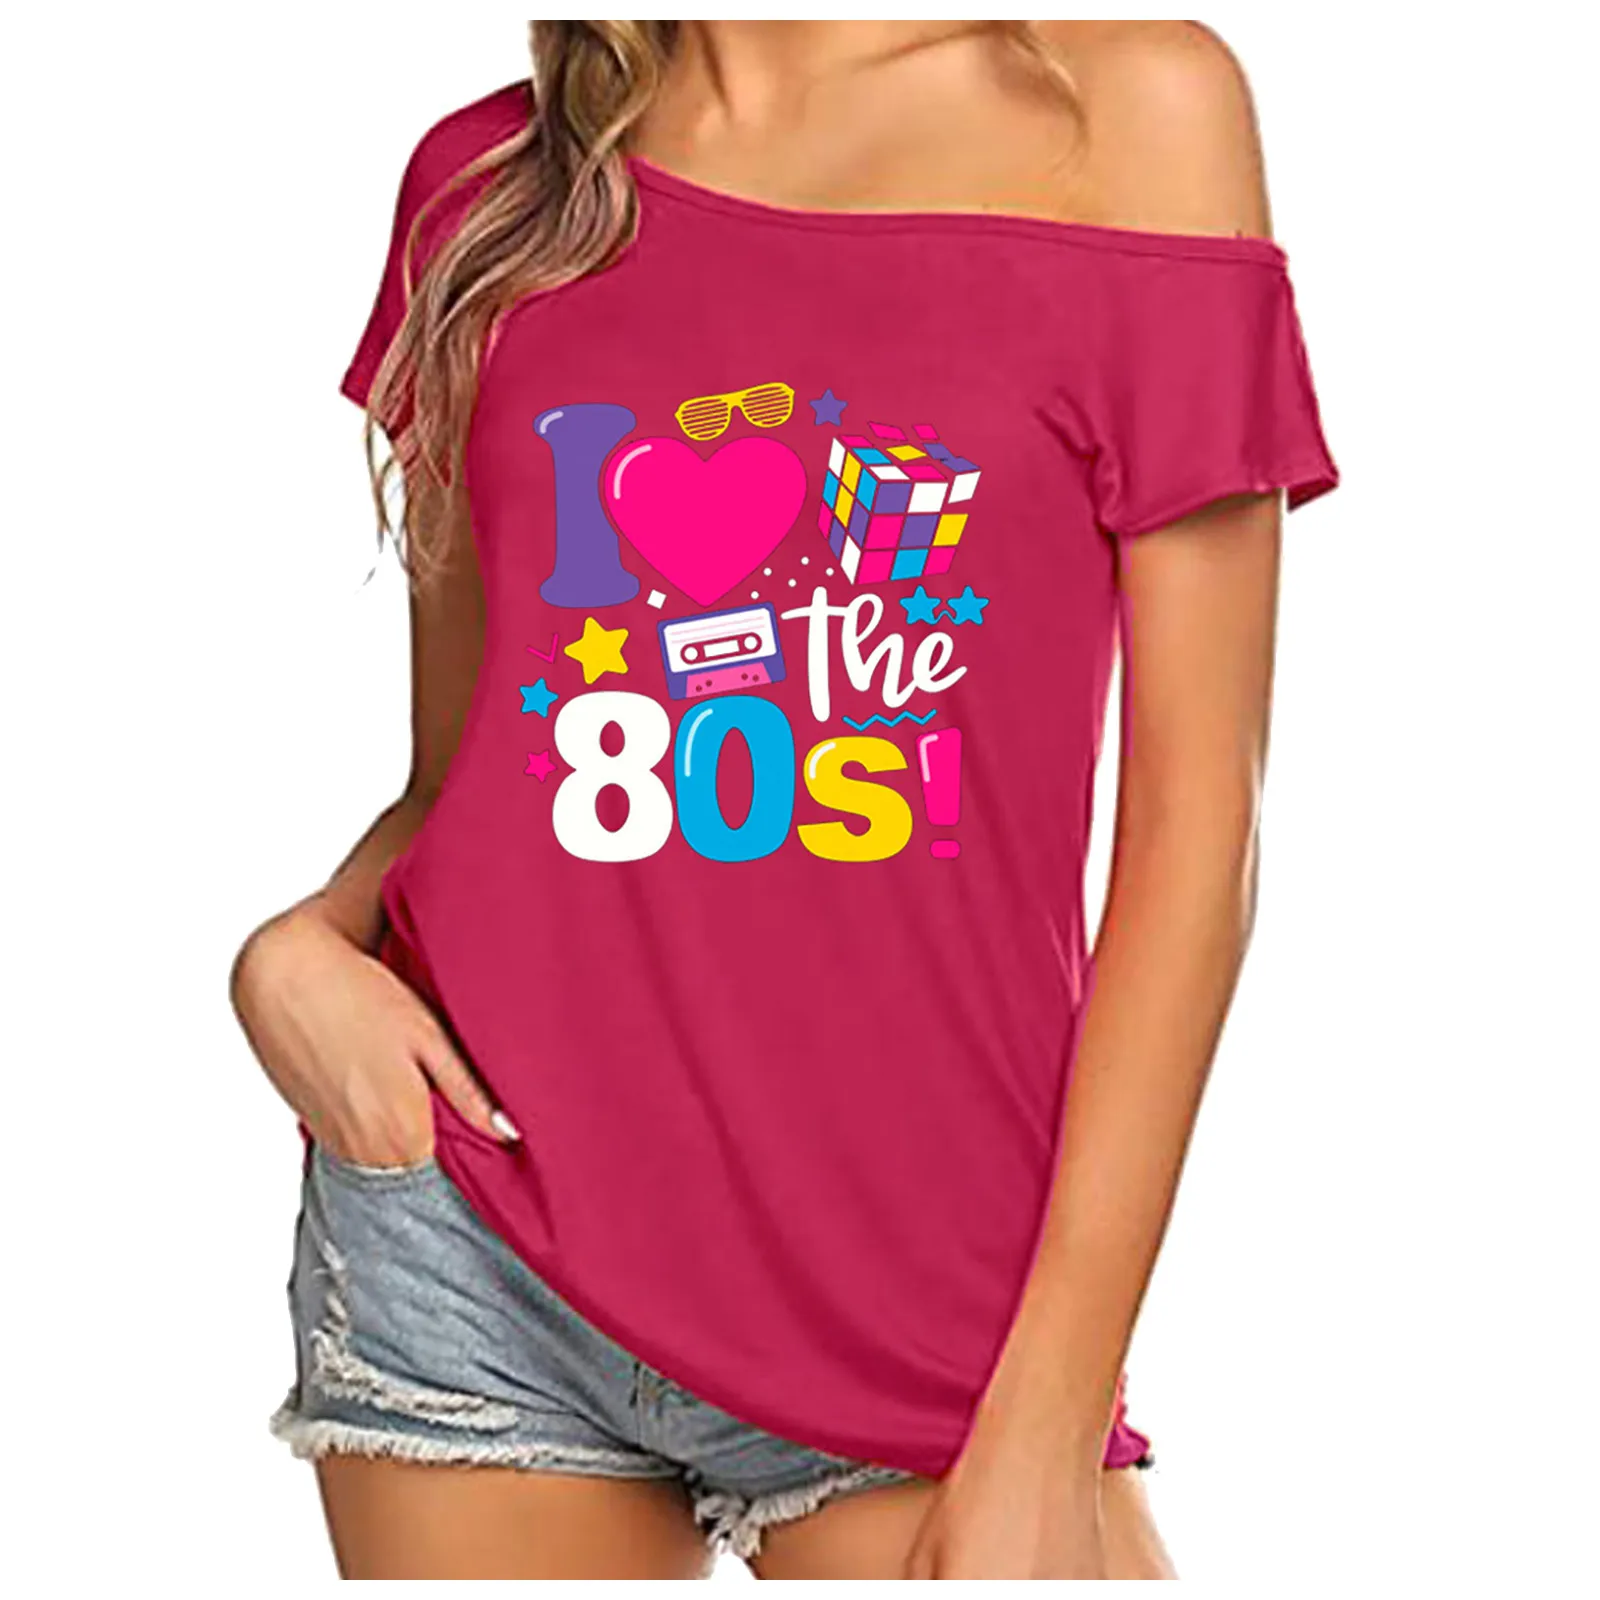 I Love The 80s Off The Shoulder Tops Female Summer Casual Short Sleeve Graphic Tees Streetwear Disco Costumes -S83757799a0554fea99bf47c89e47597cY